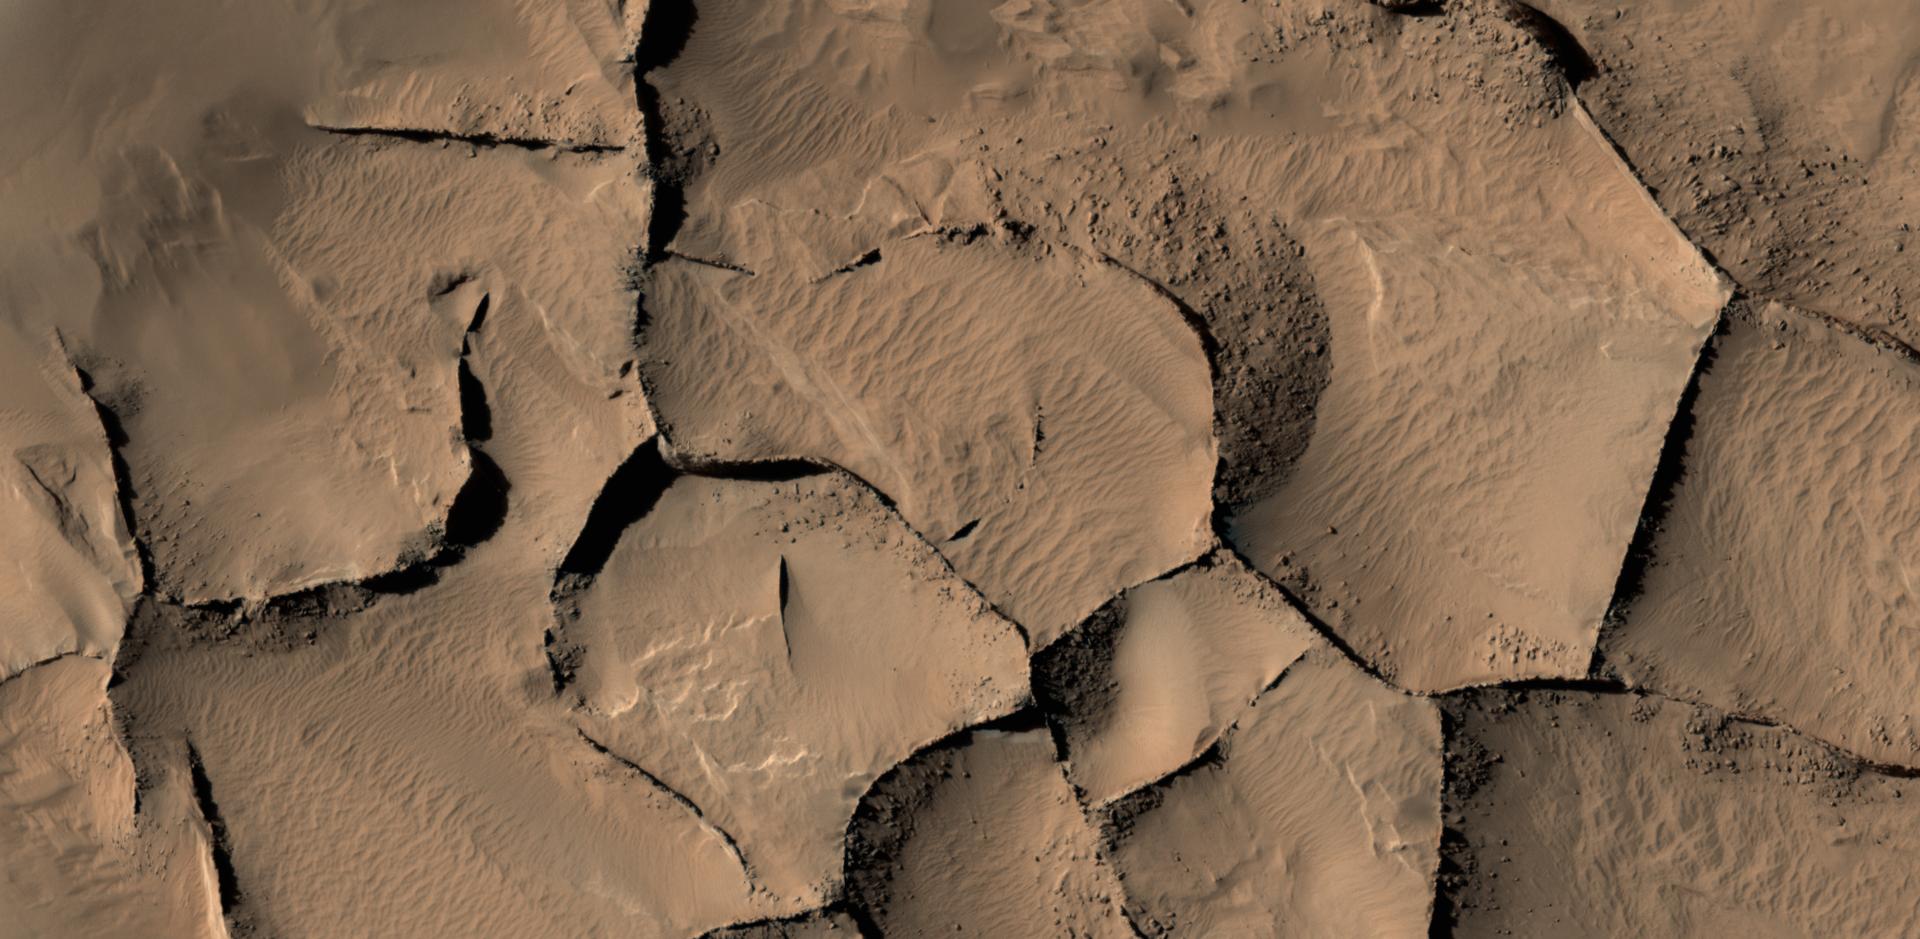 This view shows part of an area on Mars with narrow rock ridges, some as tall as a 16-story building.